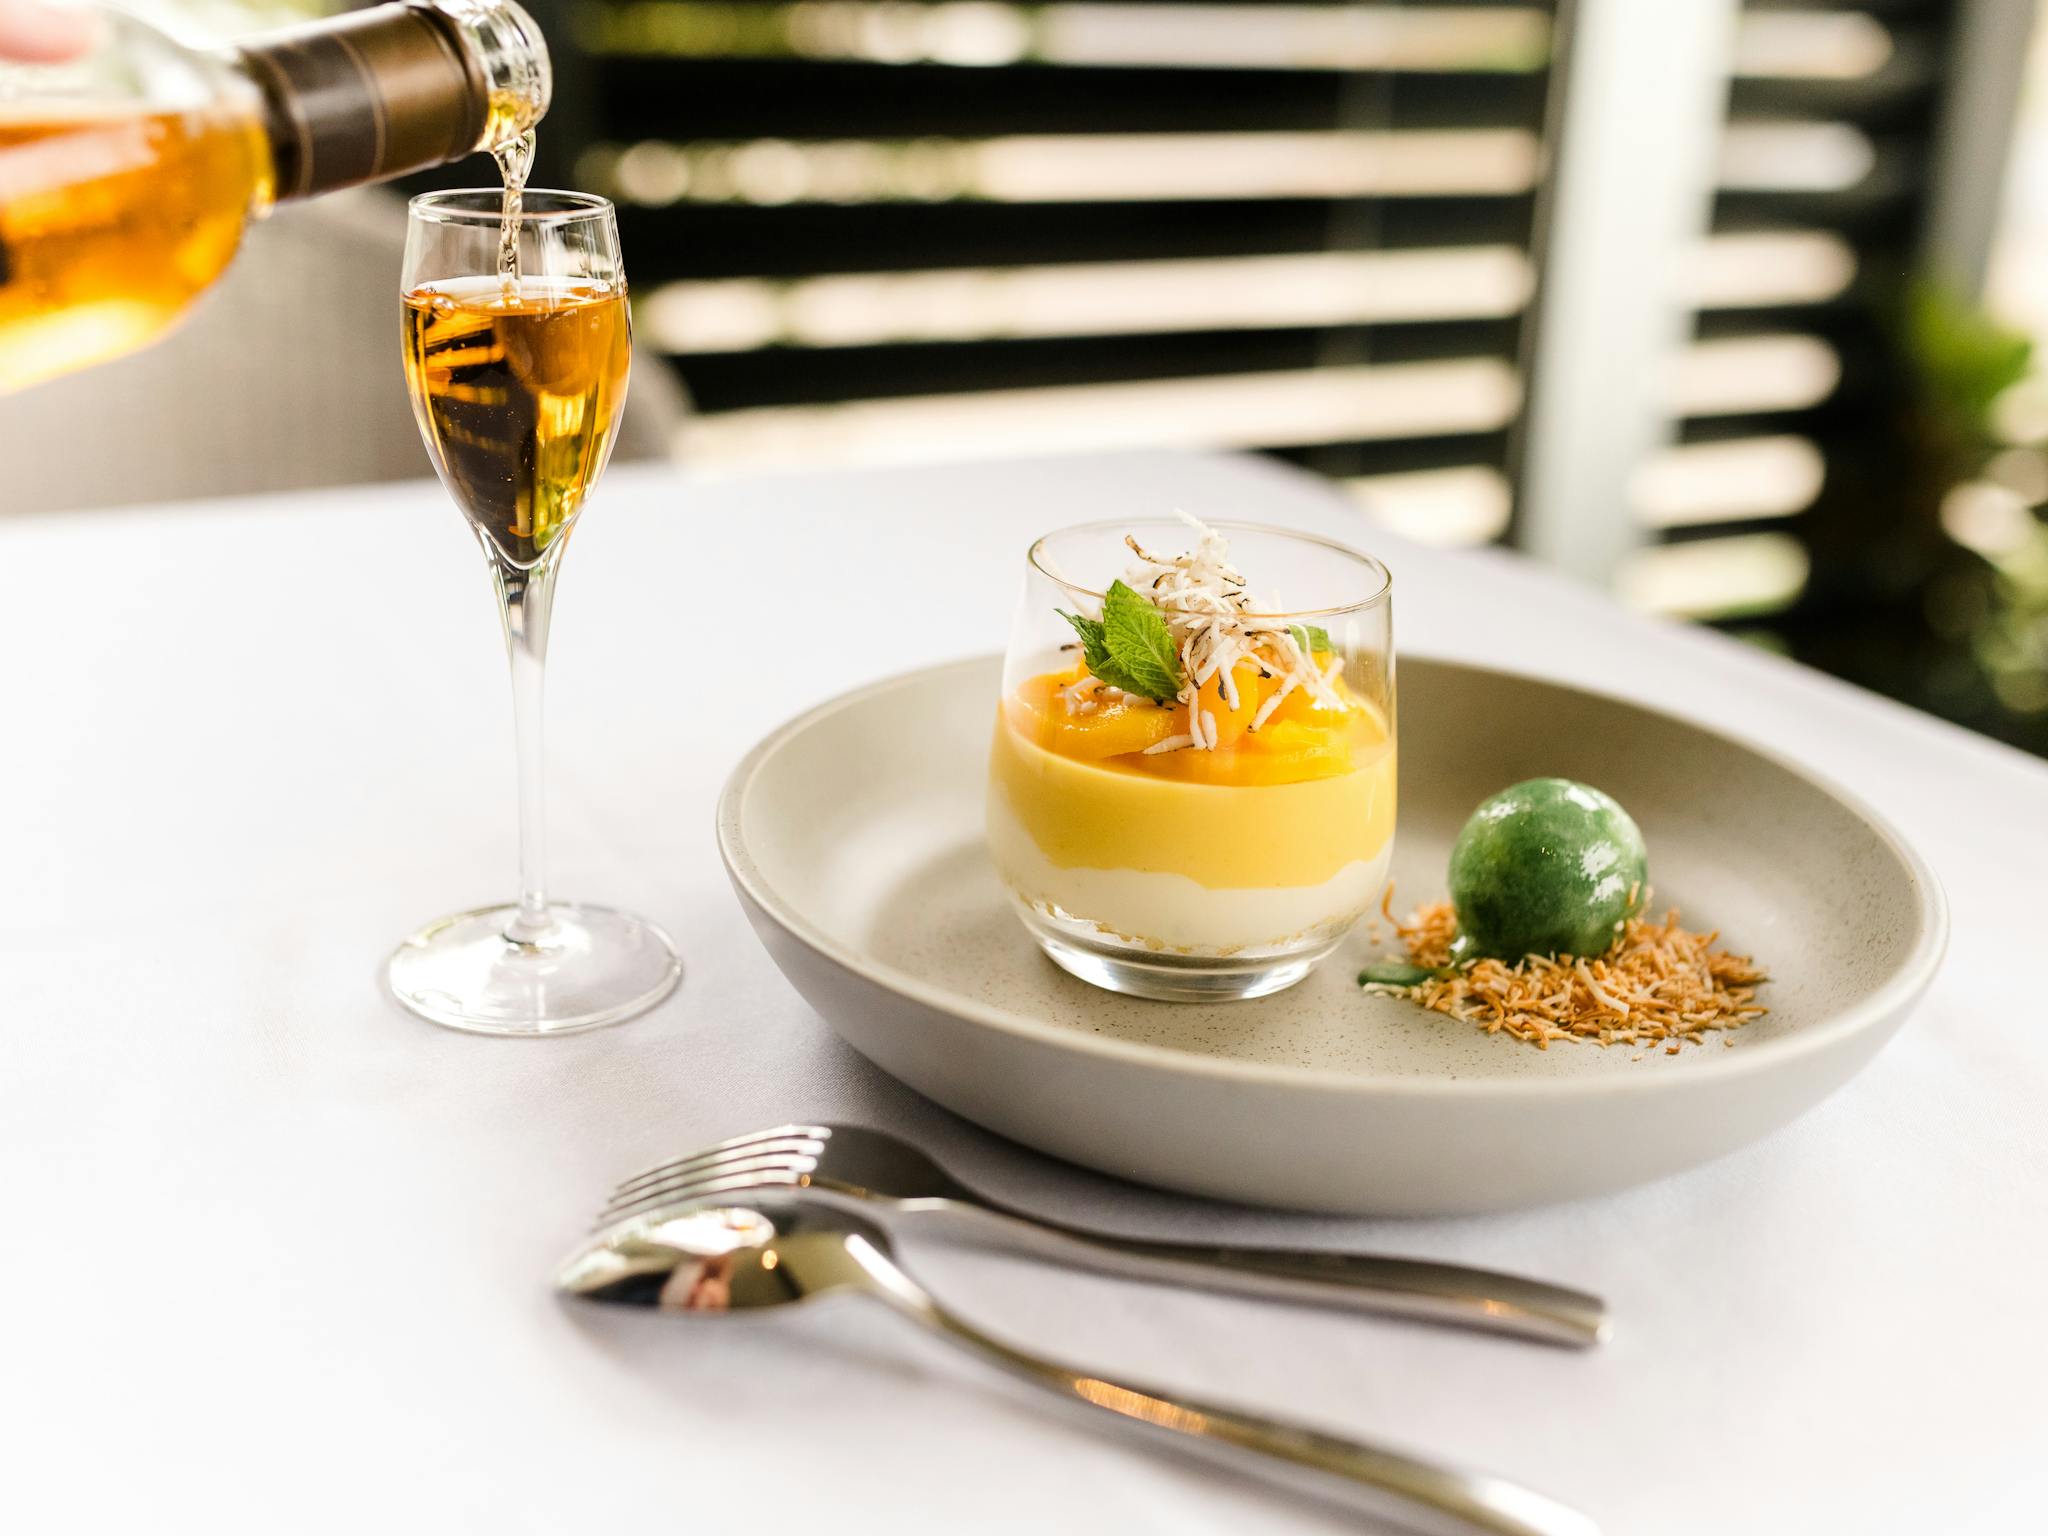 Beautifully presented mango, lime and coconut dish served with local muscat.